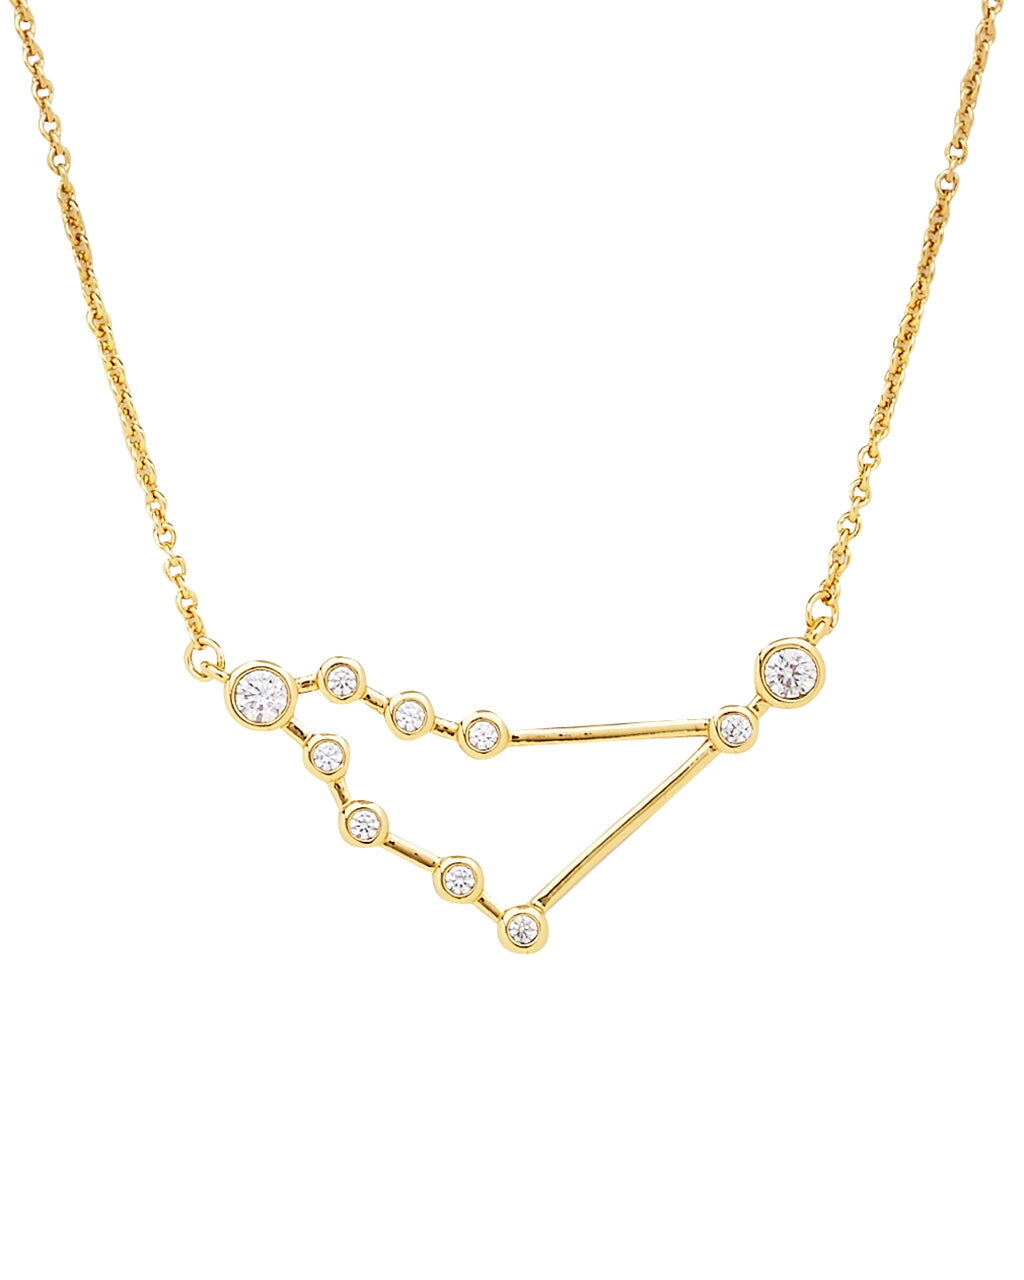 'When Stars Align' Constellation Necklace Necklace Sterling Forever Gold Capricorn (Dec 22 - Jan 19) 